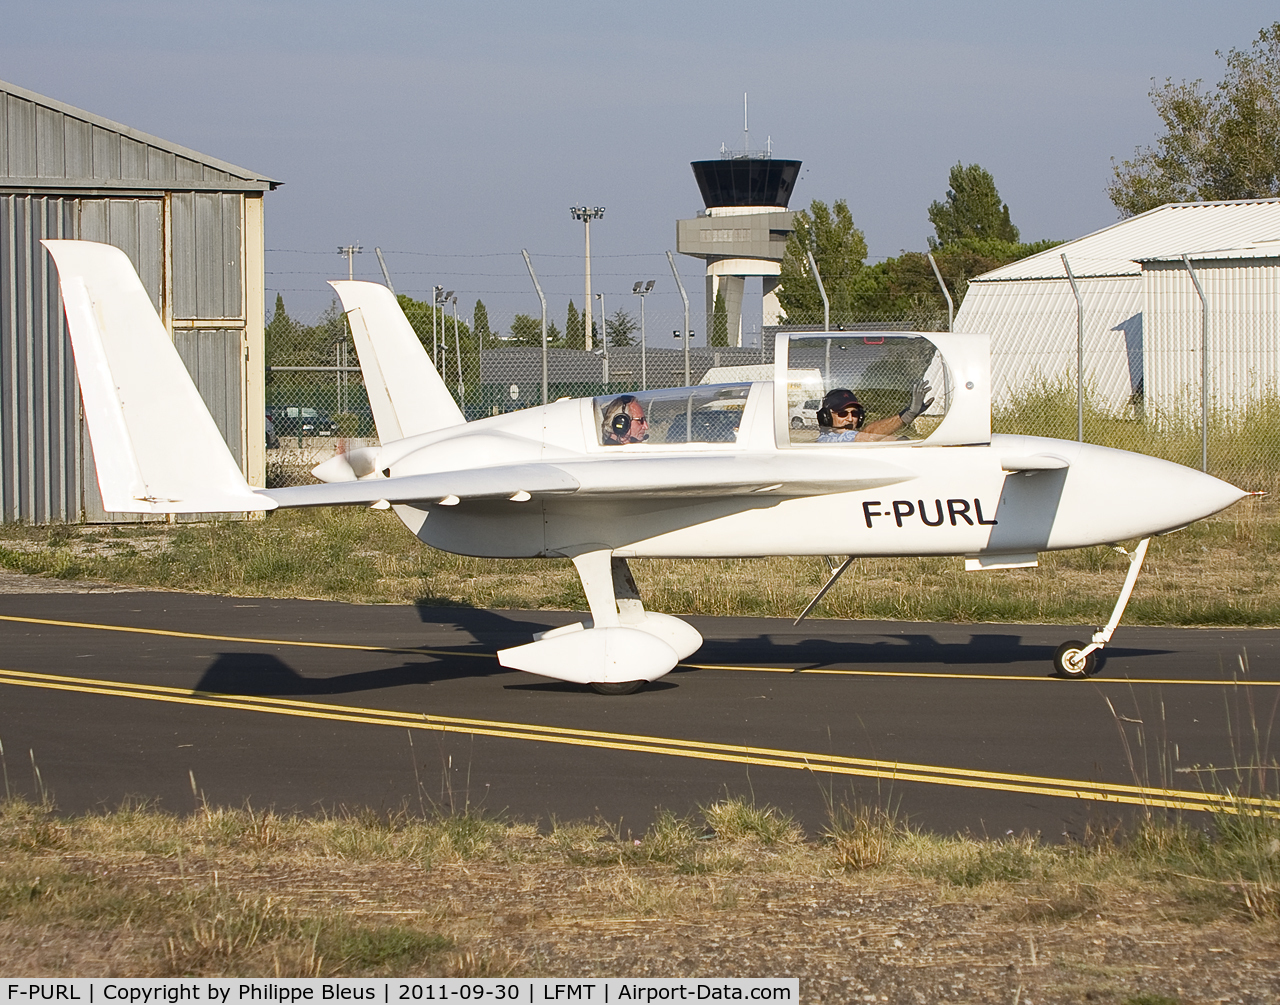 F-PURL, Rutan Long-EZ C/N 127, Taxiing out for a flight. Thanks to Walter P. (pilot here) who made me spend one of the best days of my life.